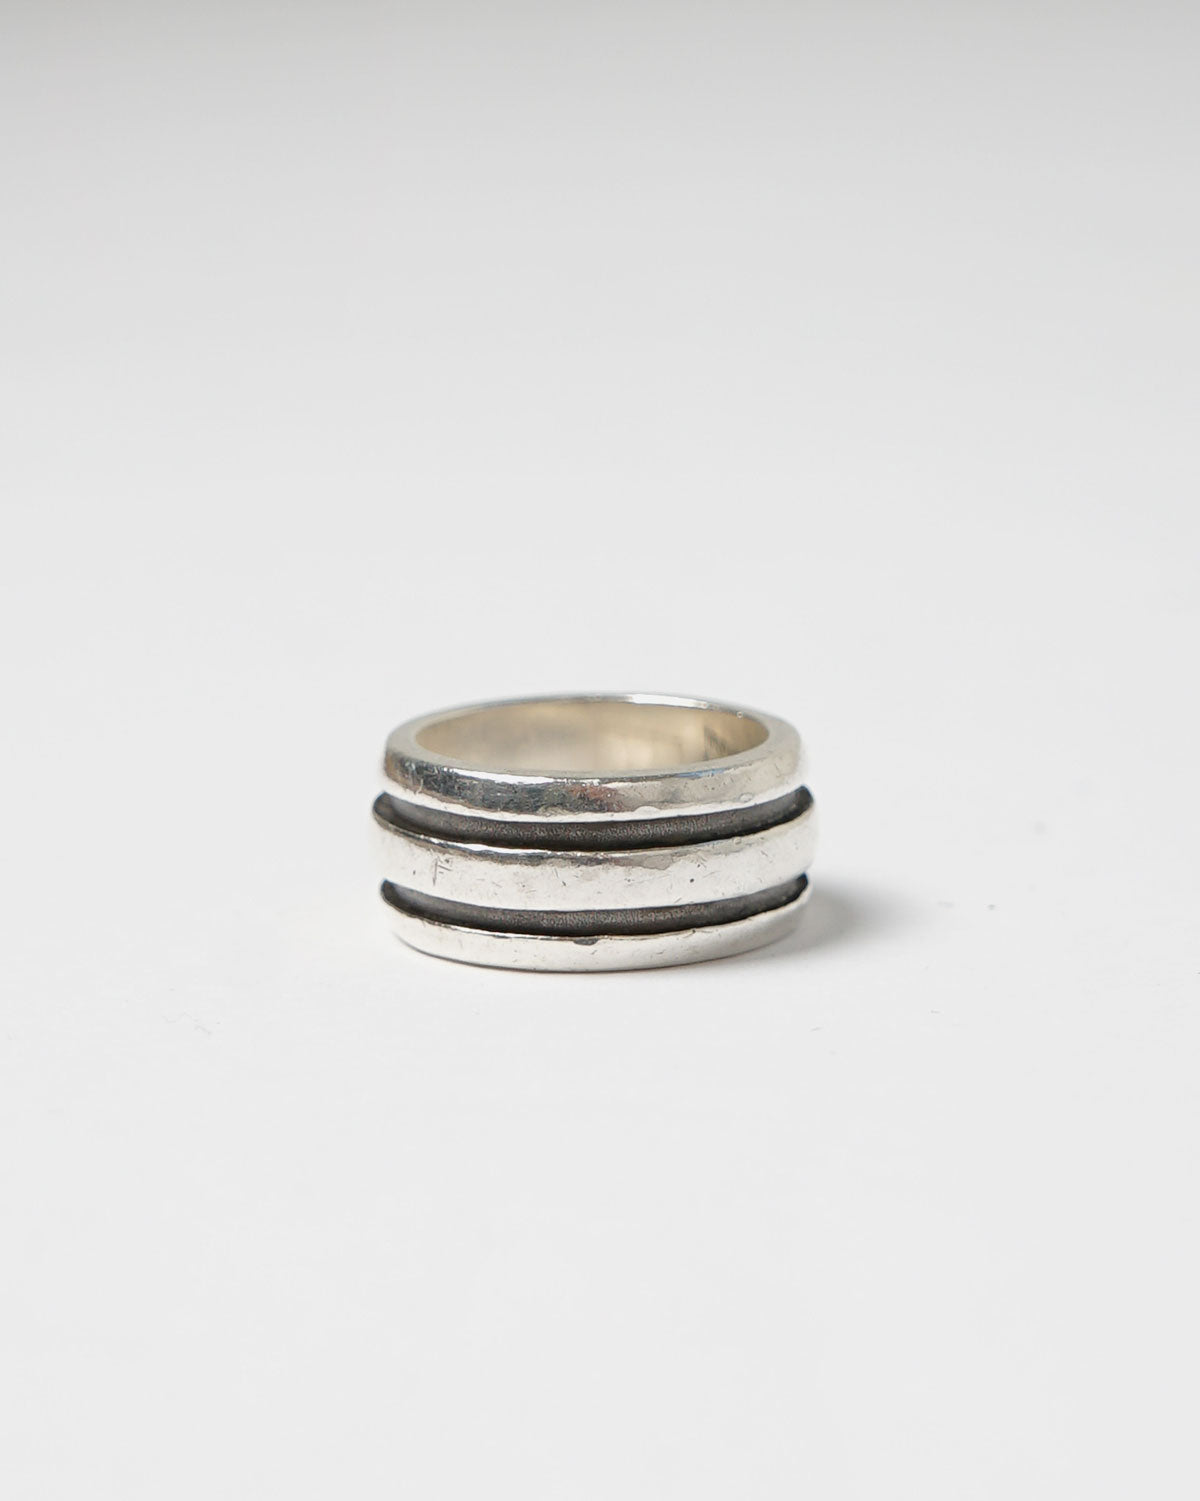 Silver Band Ring / size: 5.5